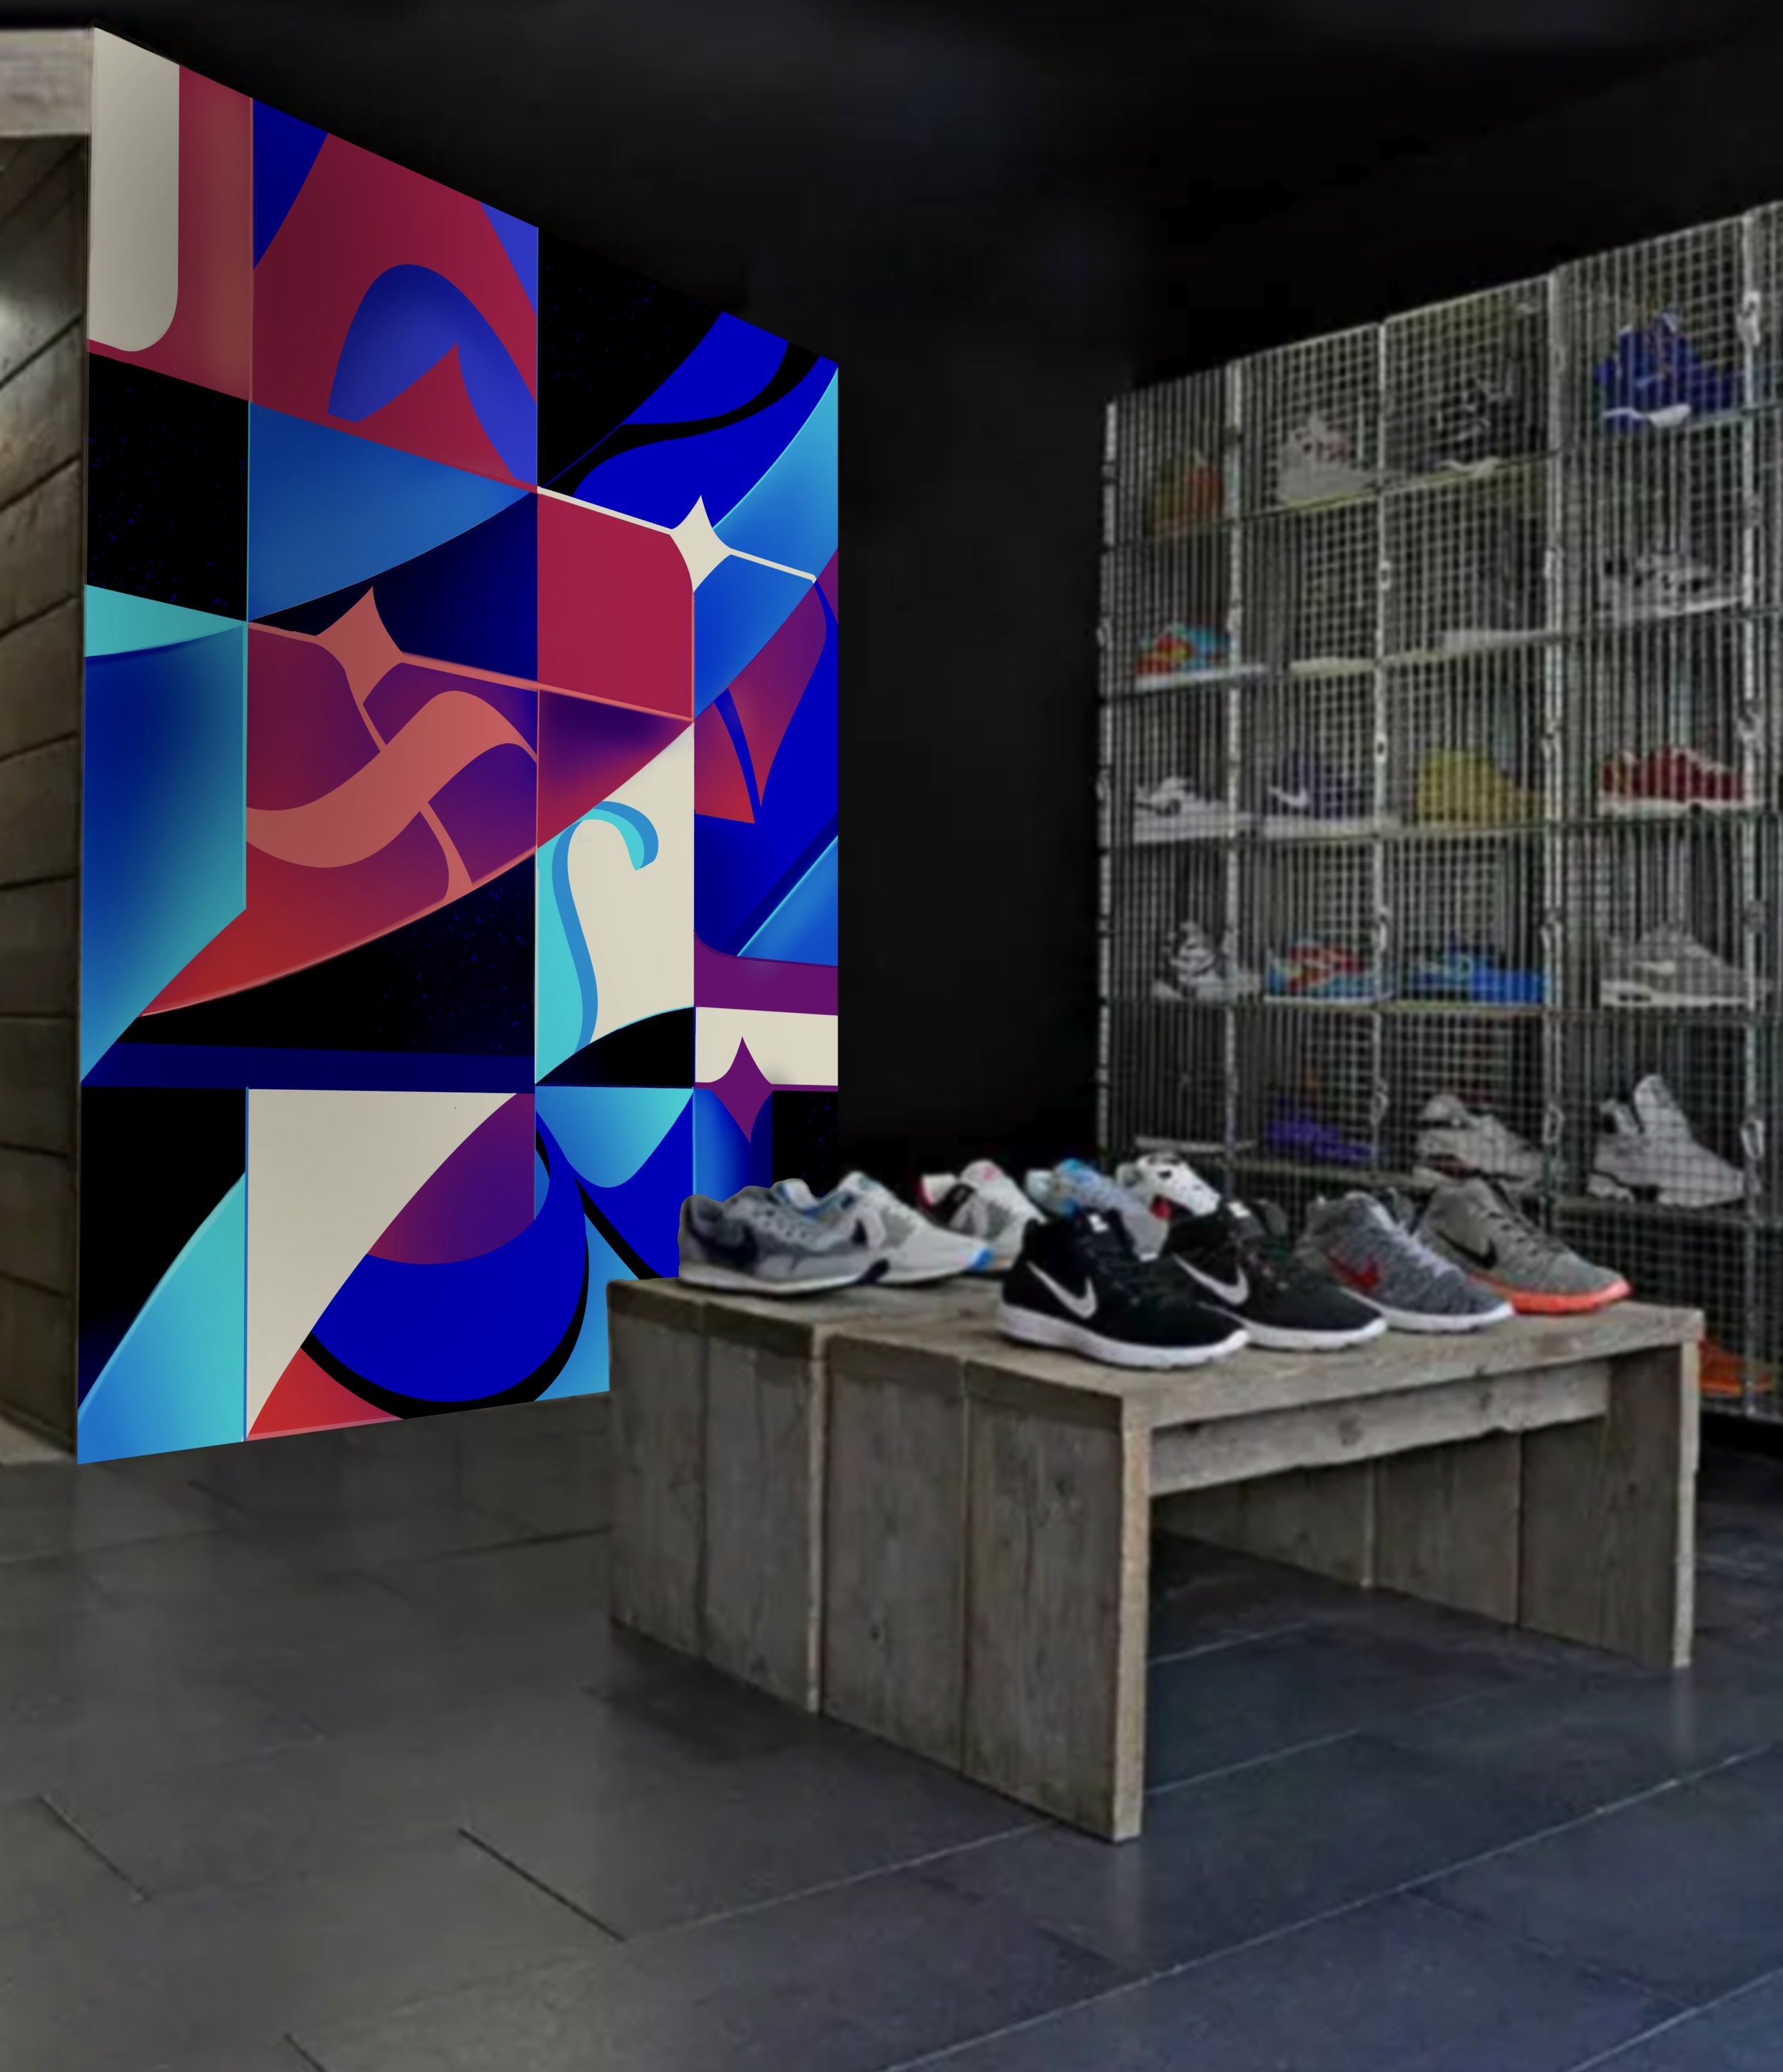  Shoe store interior mural rendering of abstract shapes designed by Coco Nella (Corinne Pulsinelle) 